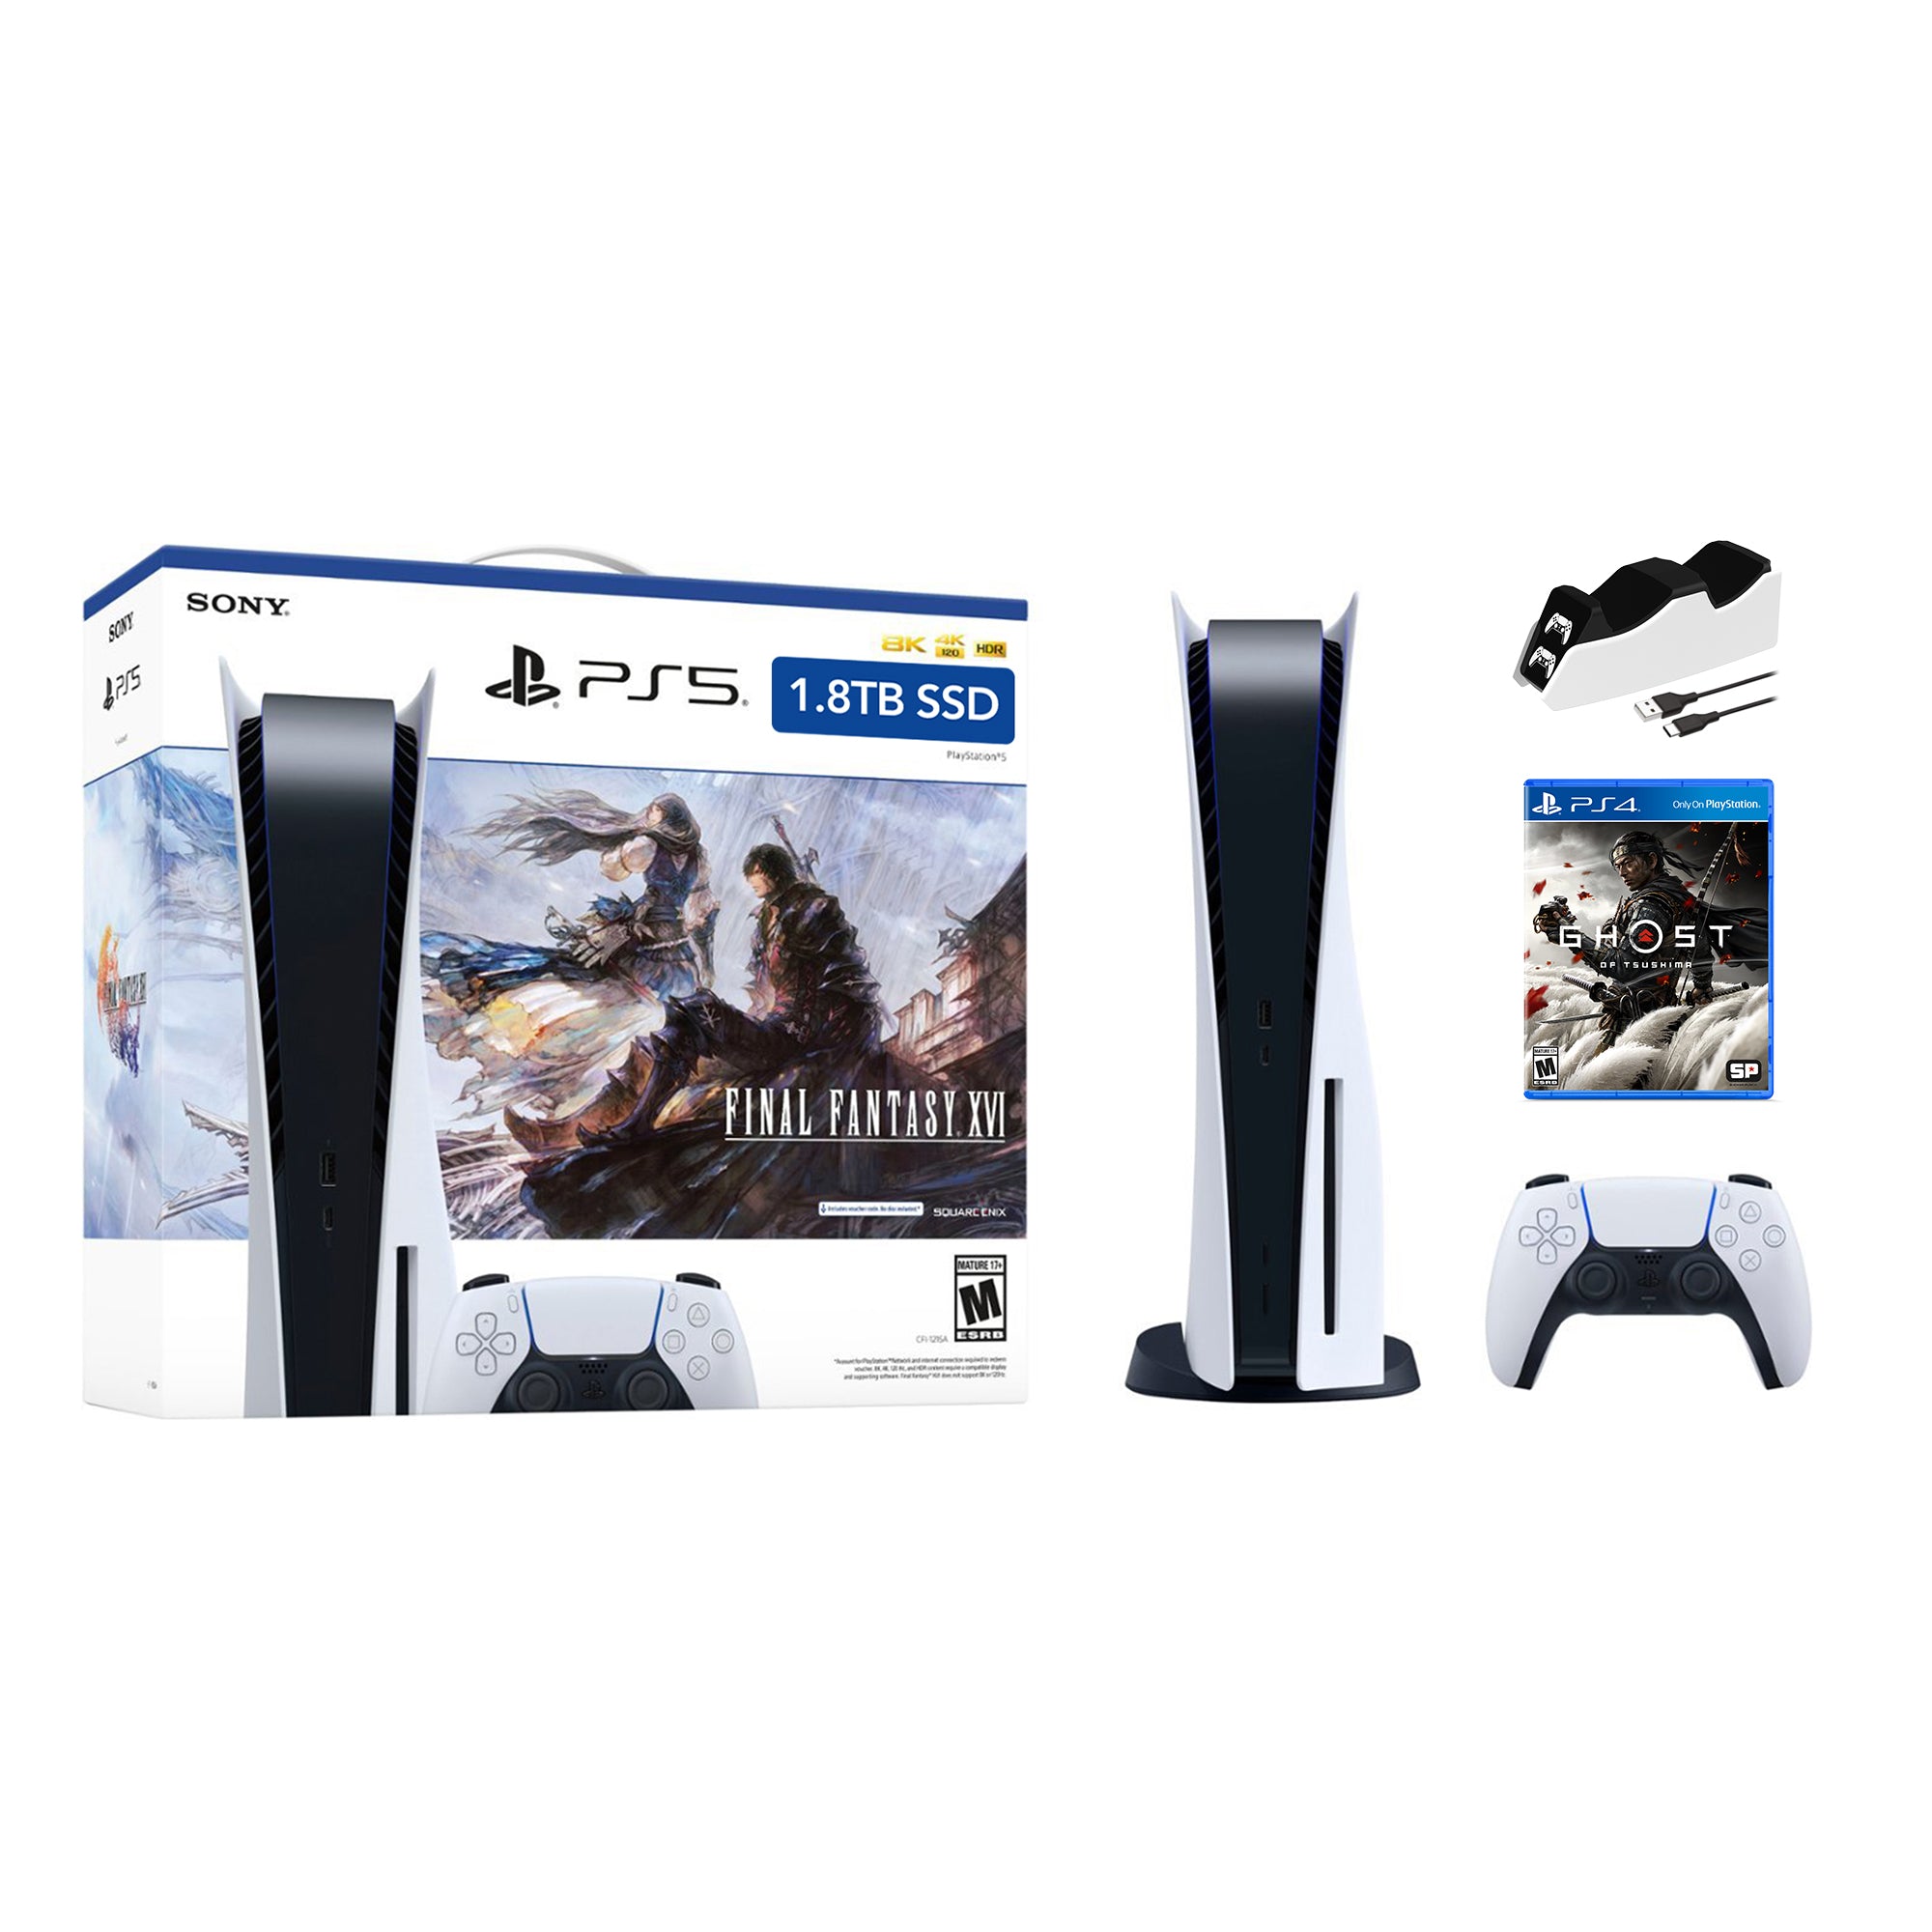 PlayStation 5 Upgraded 1.8TB Disc Edition FINAL FANTASY XVI Bundle with Ghost of Tsushima and Mytrix Controller Charger - PS5, White